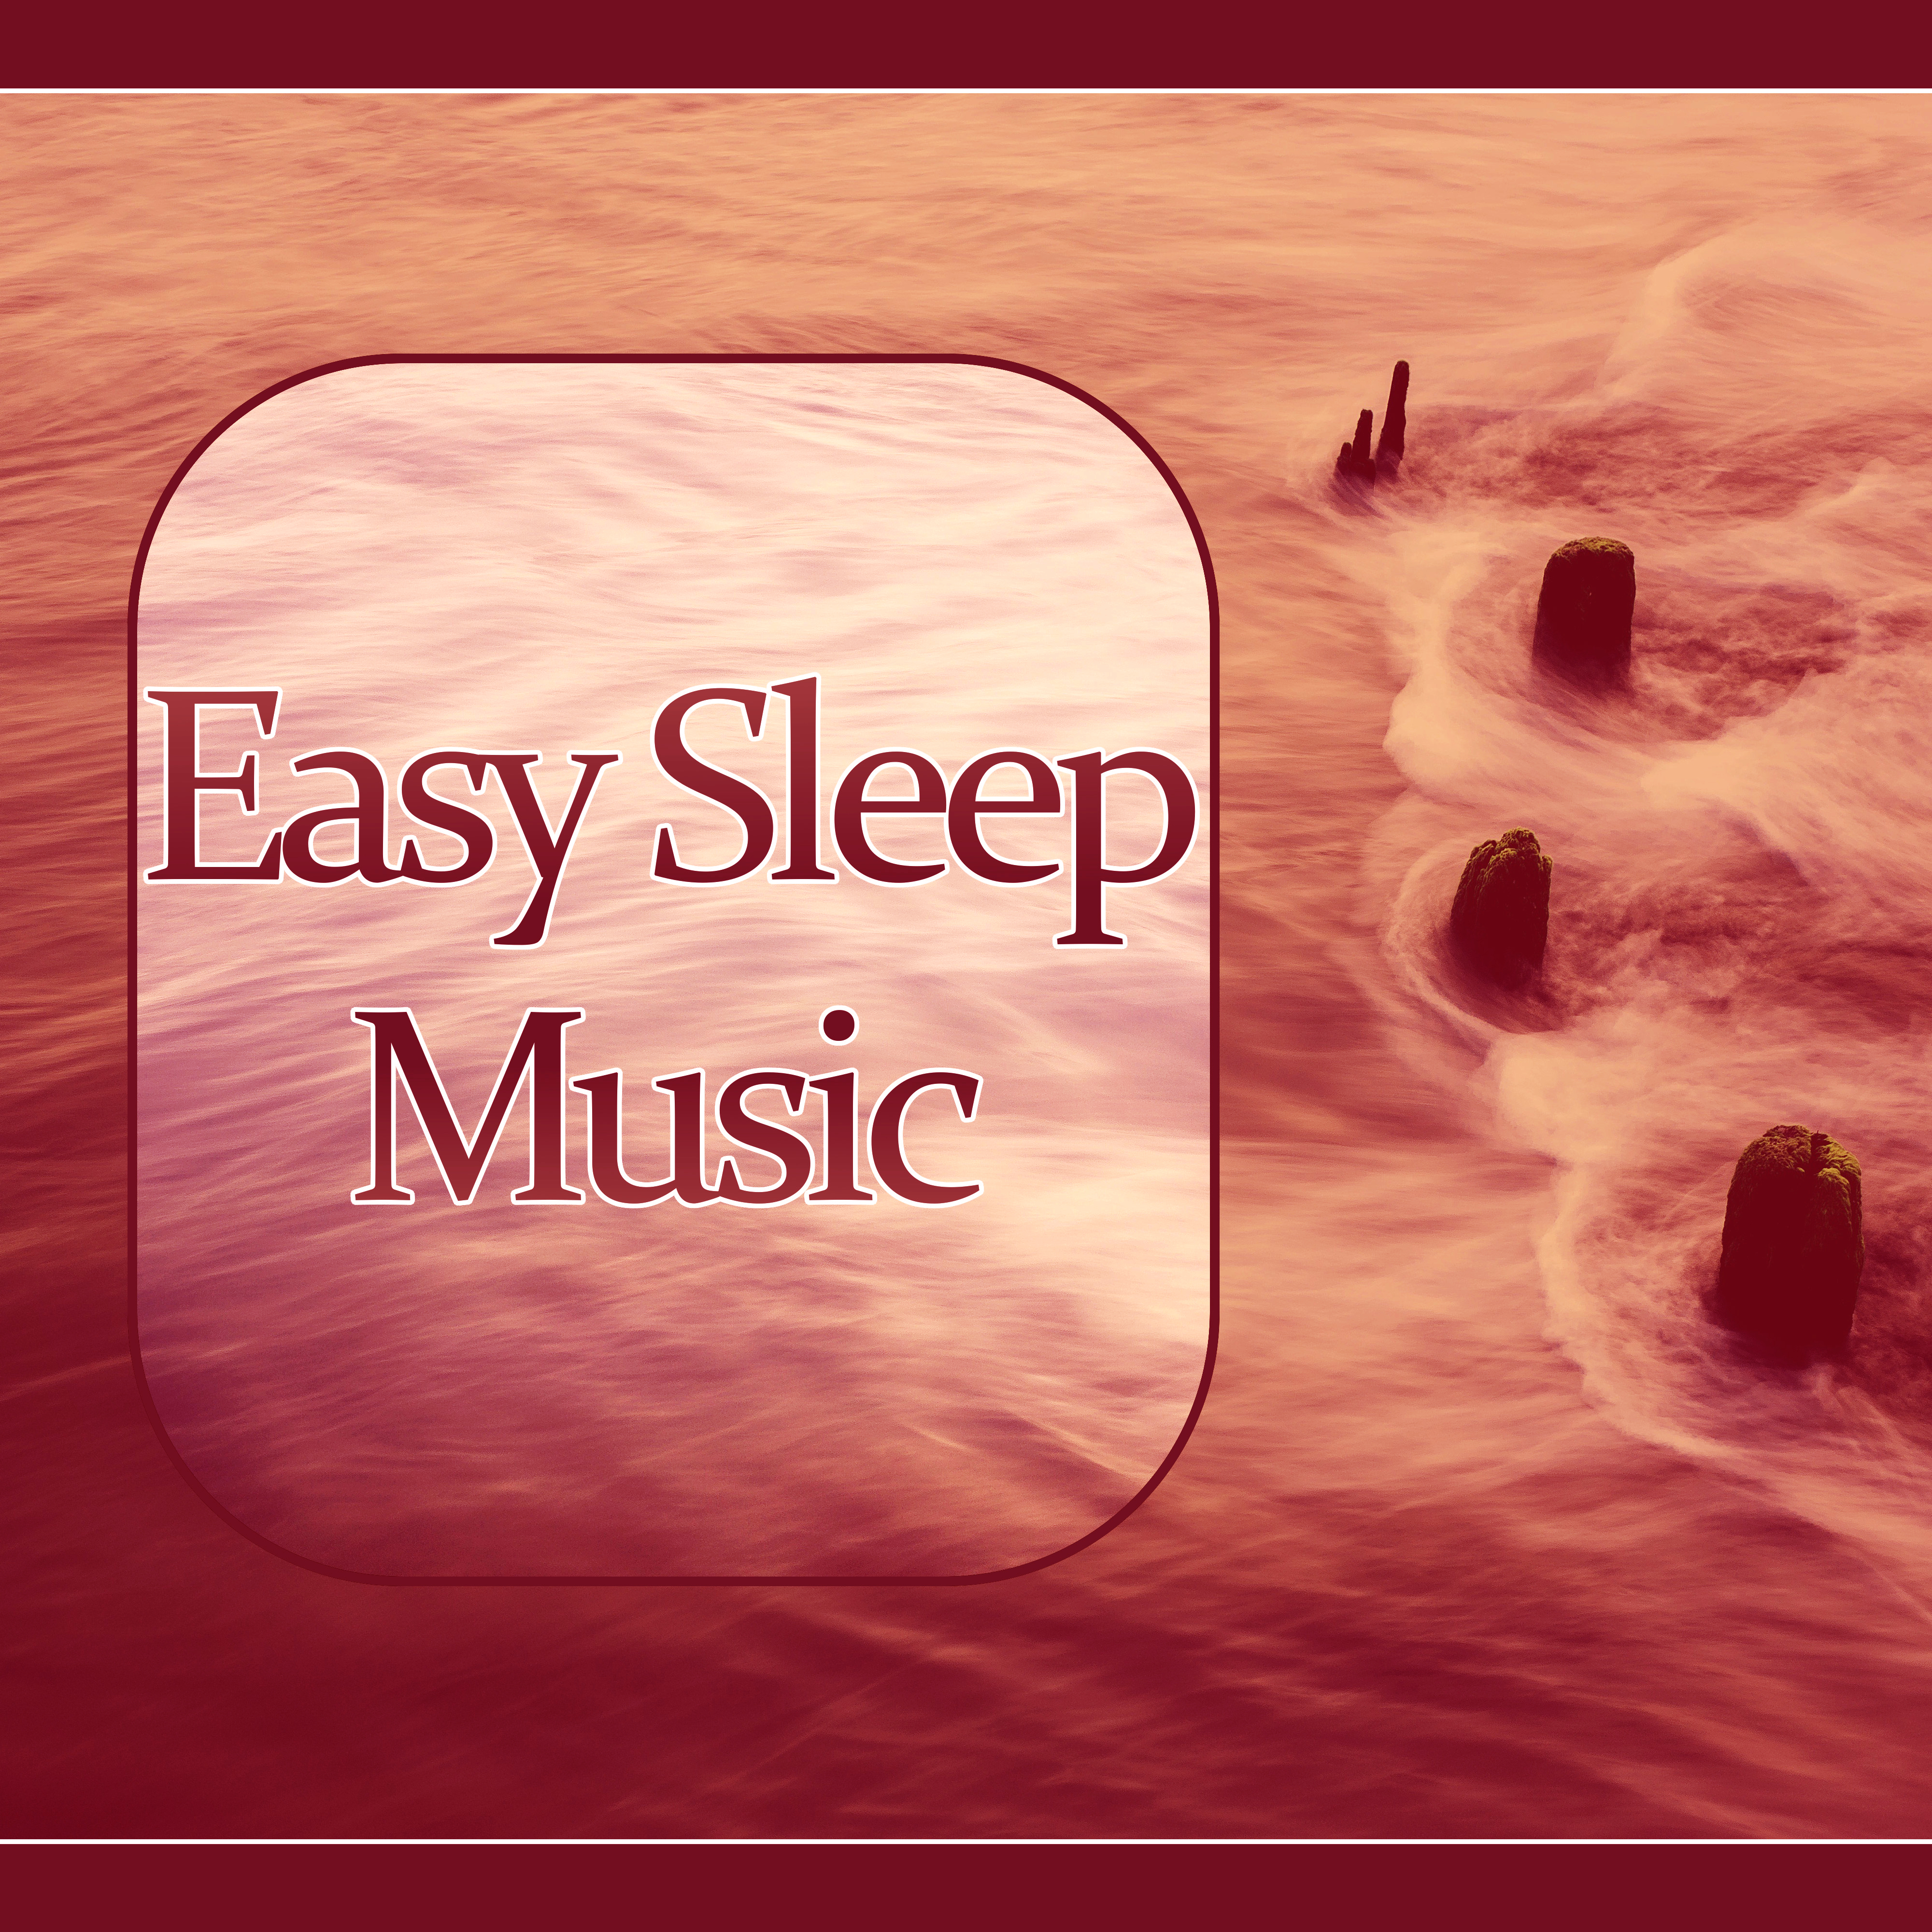 Easy Sleep Music - New Age Deep Sleep for Relaxation Meditation, Serenity Lullabies with Relaxing Nature Sounds, Insomnia Therapy, Sleep Music to Help You Relax All Night